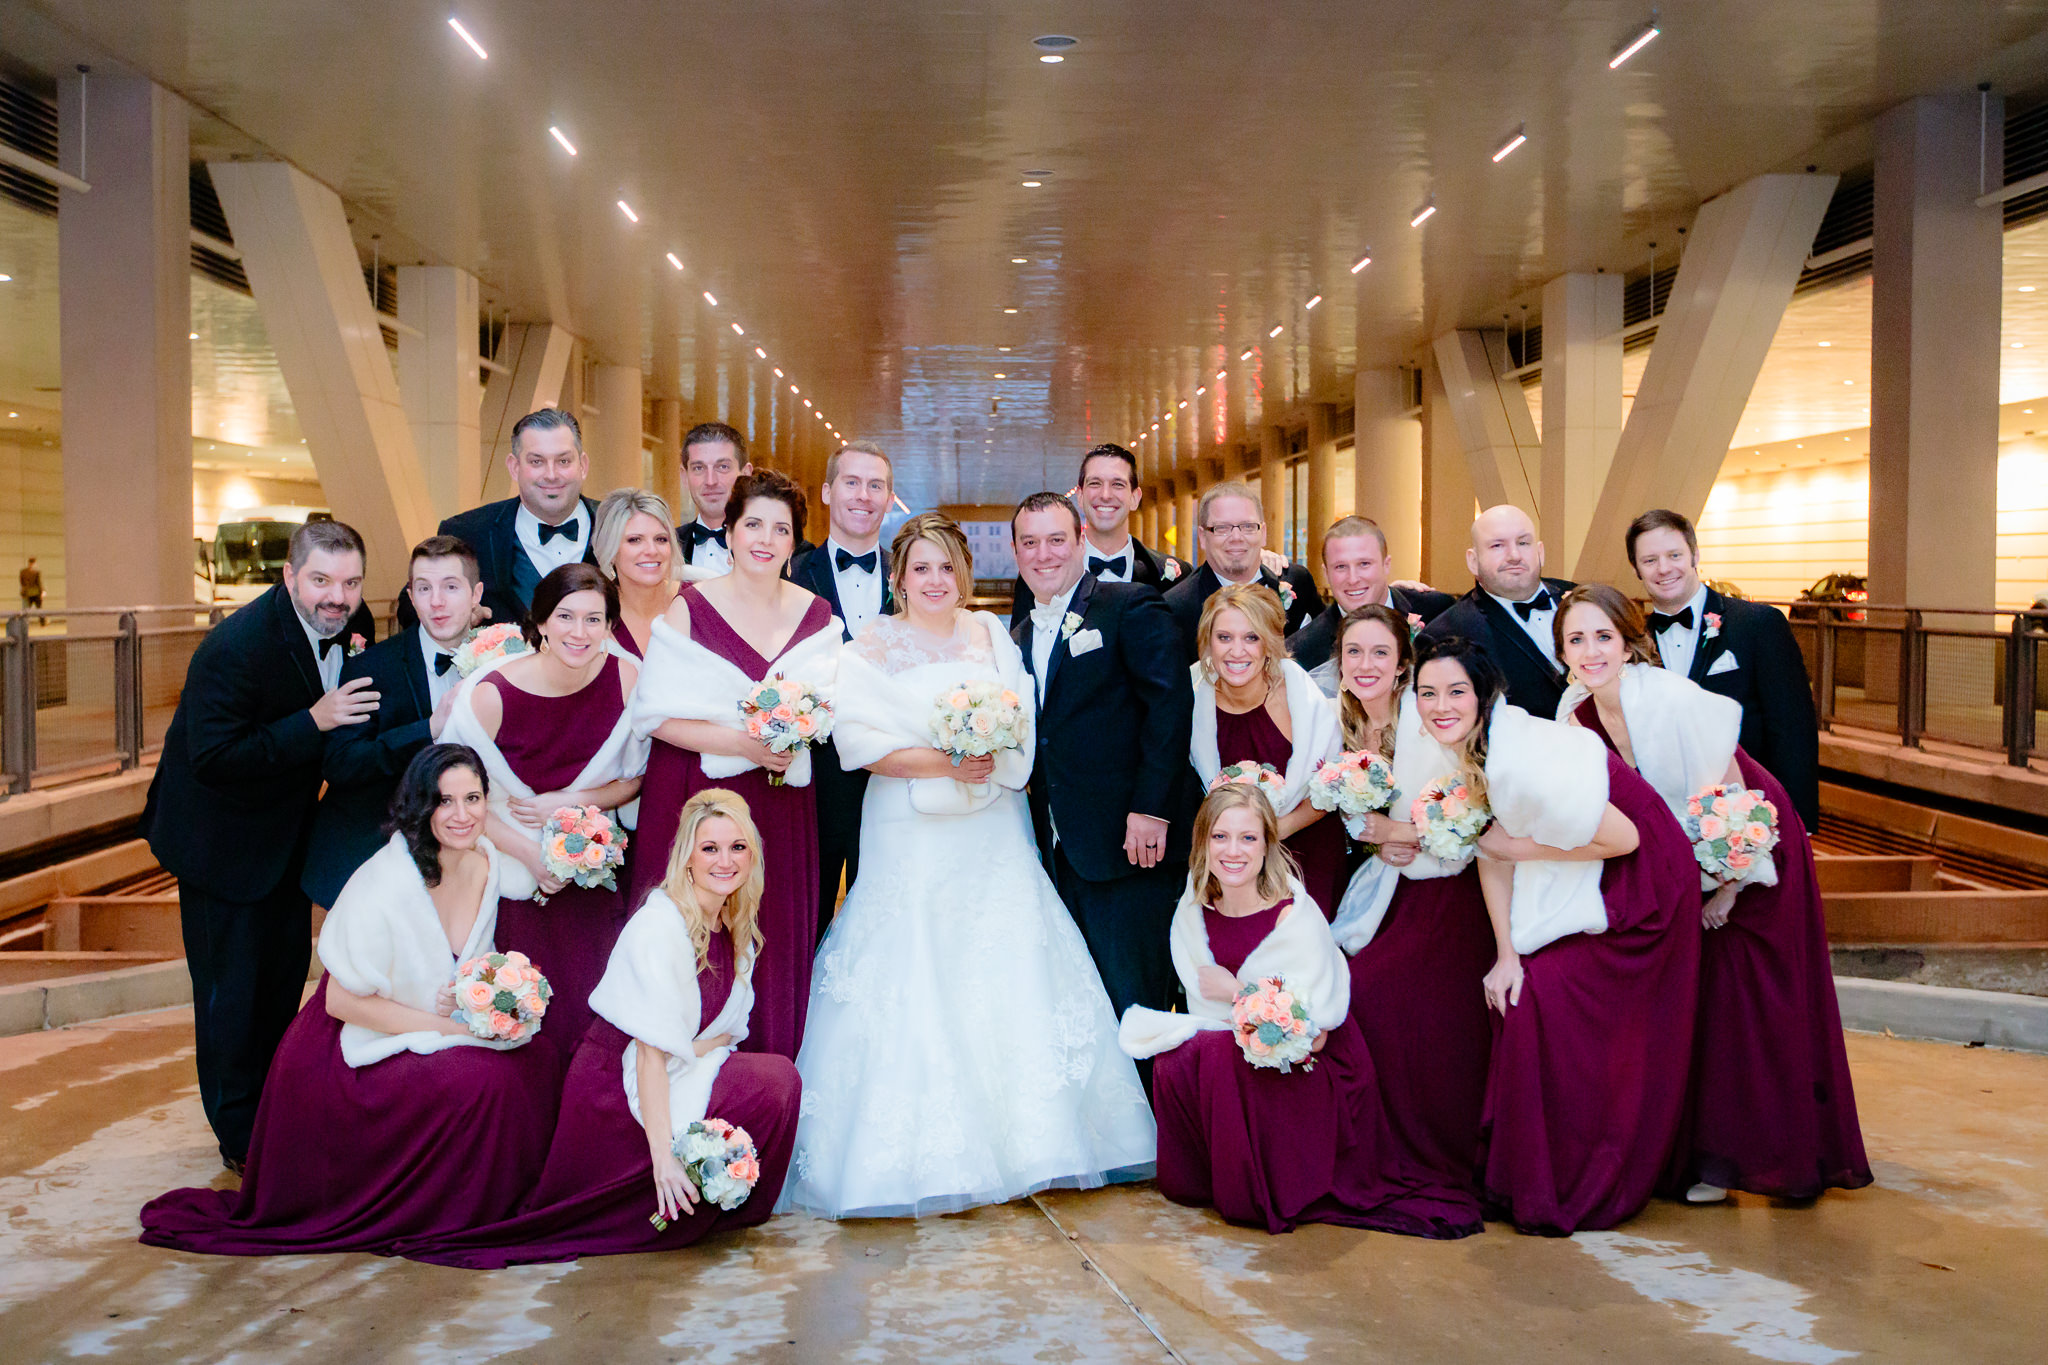 Bridal party gathers under the David L. Lawrence Convention Center in Pittsburgh for a group photo